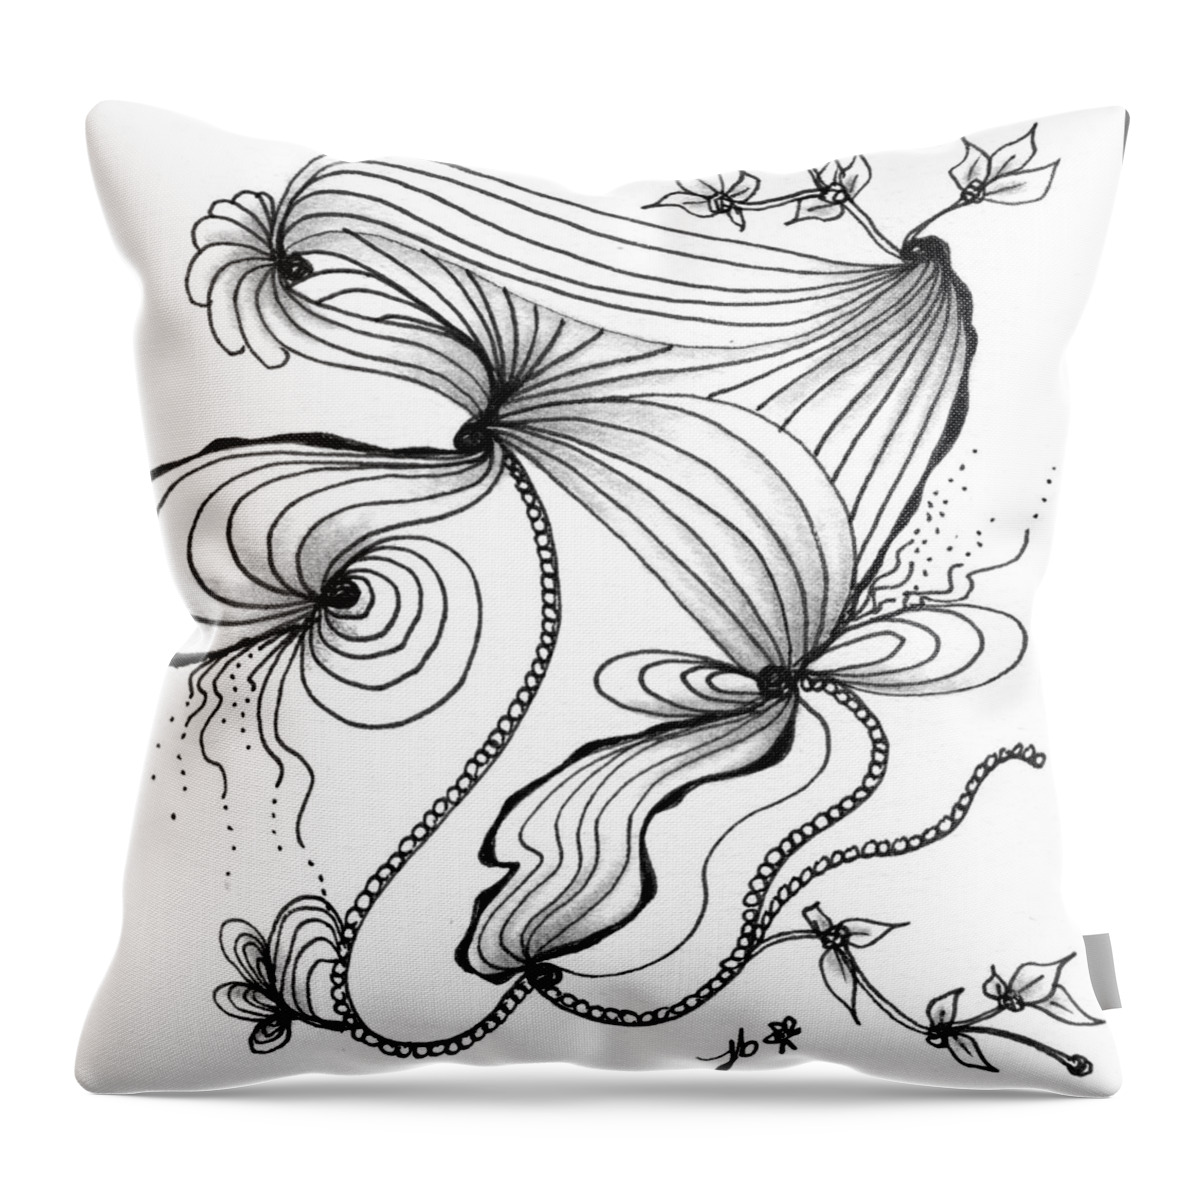 Zentangle Throw Pillow featuring the drawing The Dance by Jan Steinle